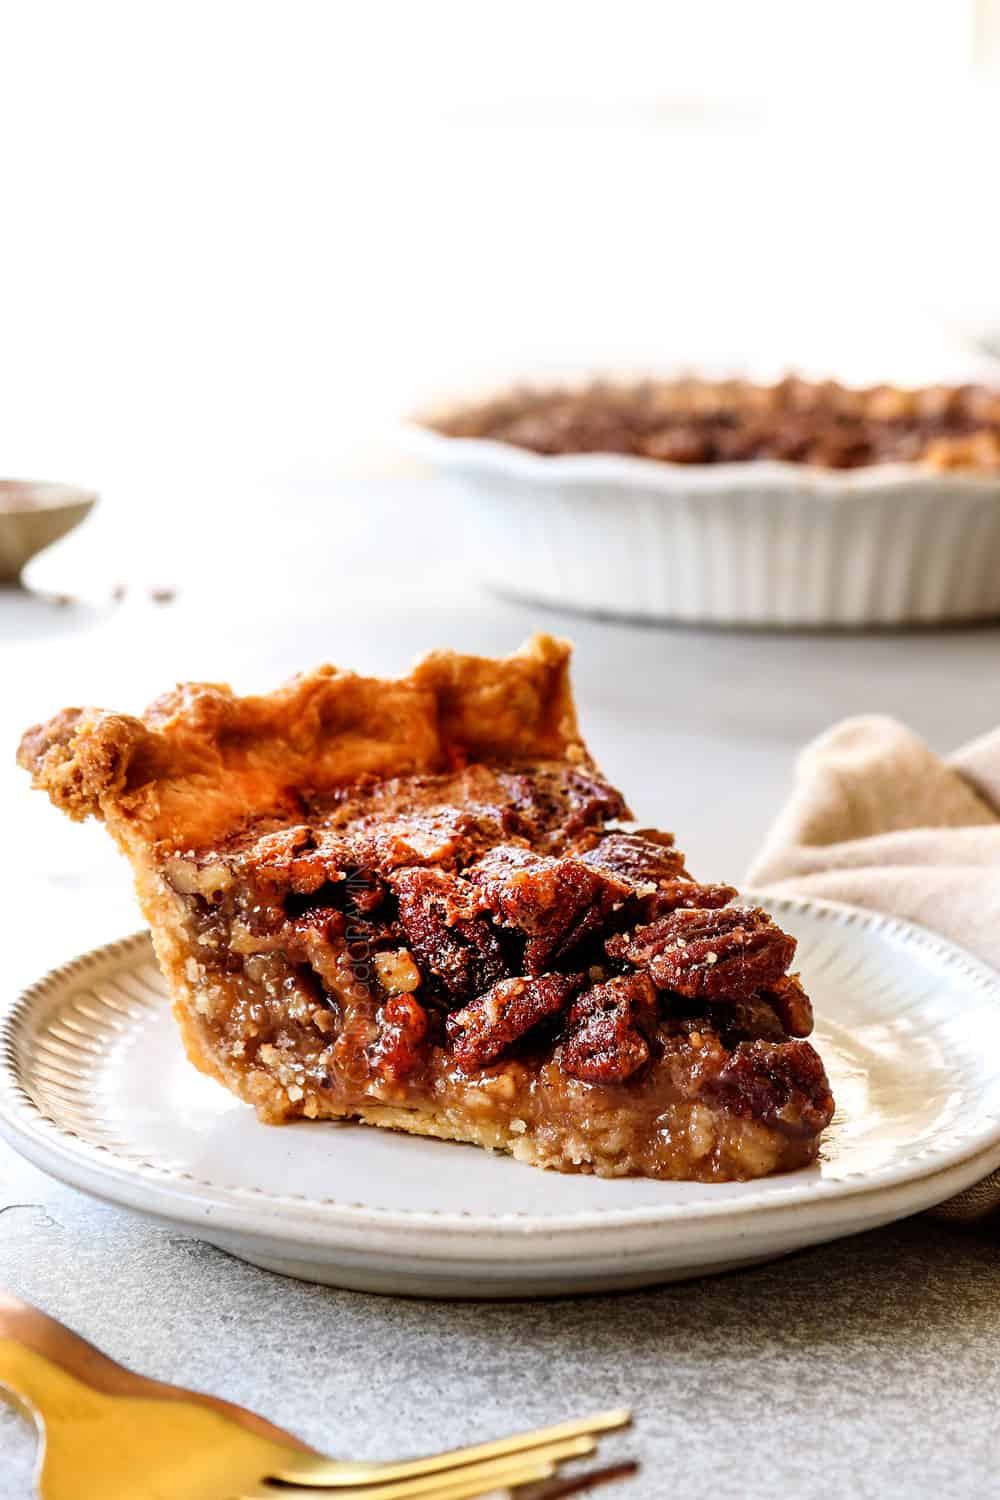 side view of homemade pecan pie on a plate showing the custard texture